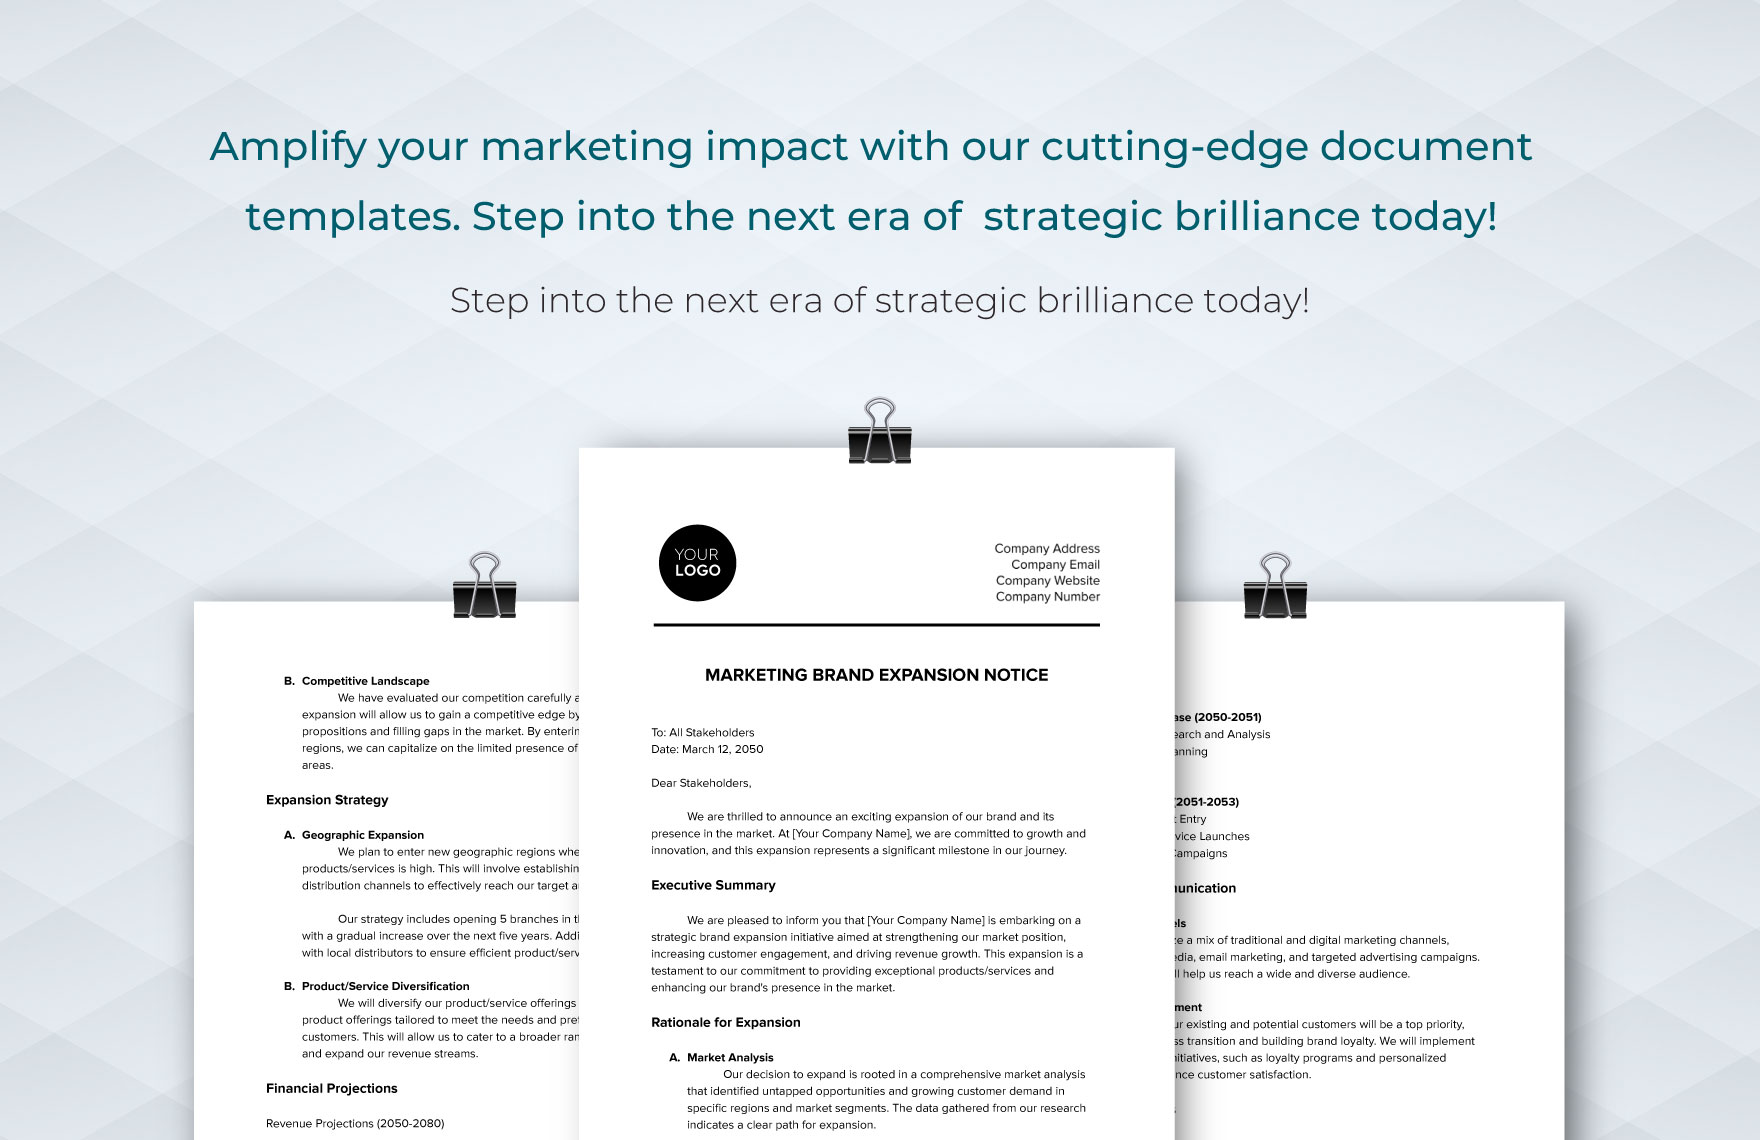 Marketing Brand Expansion Notice Template